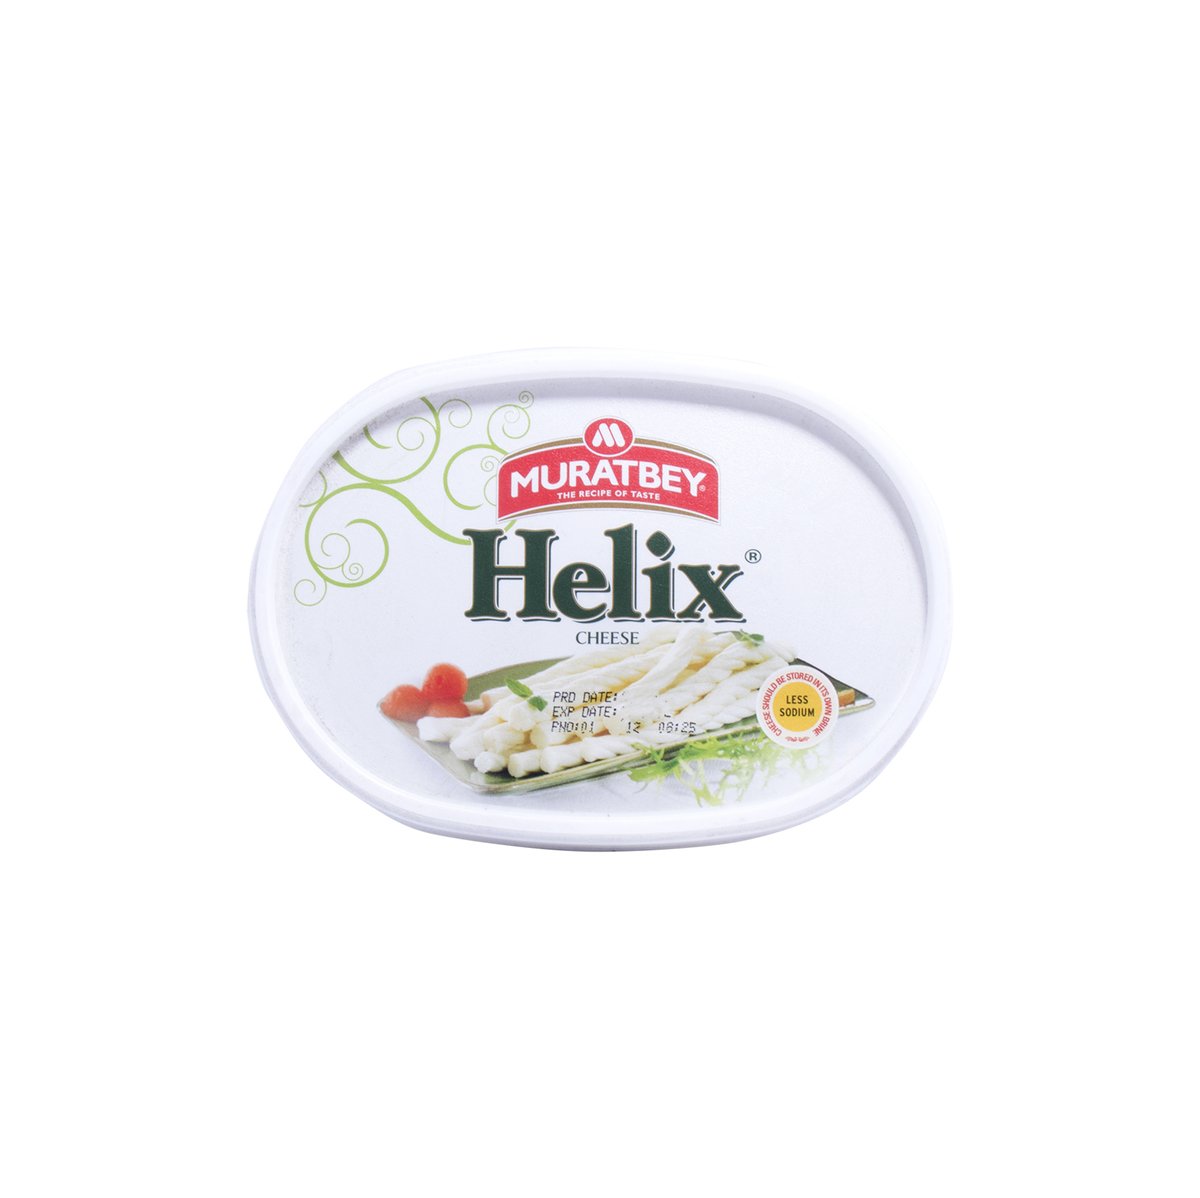 Muratbey Helix Cheese 200 g